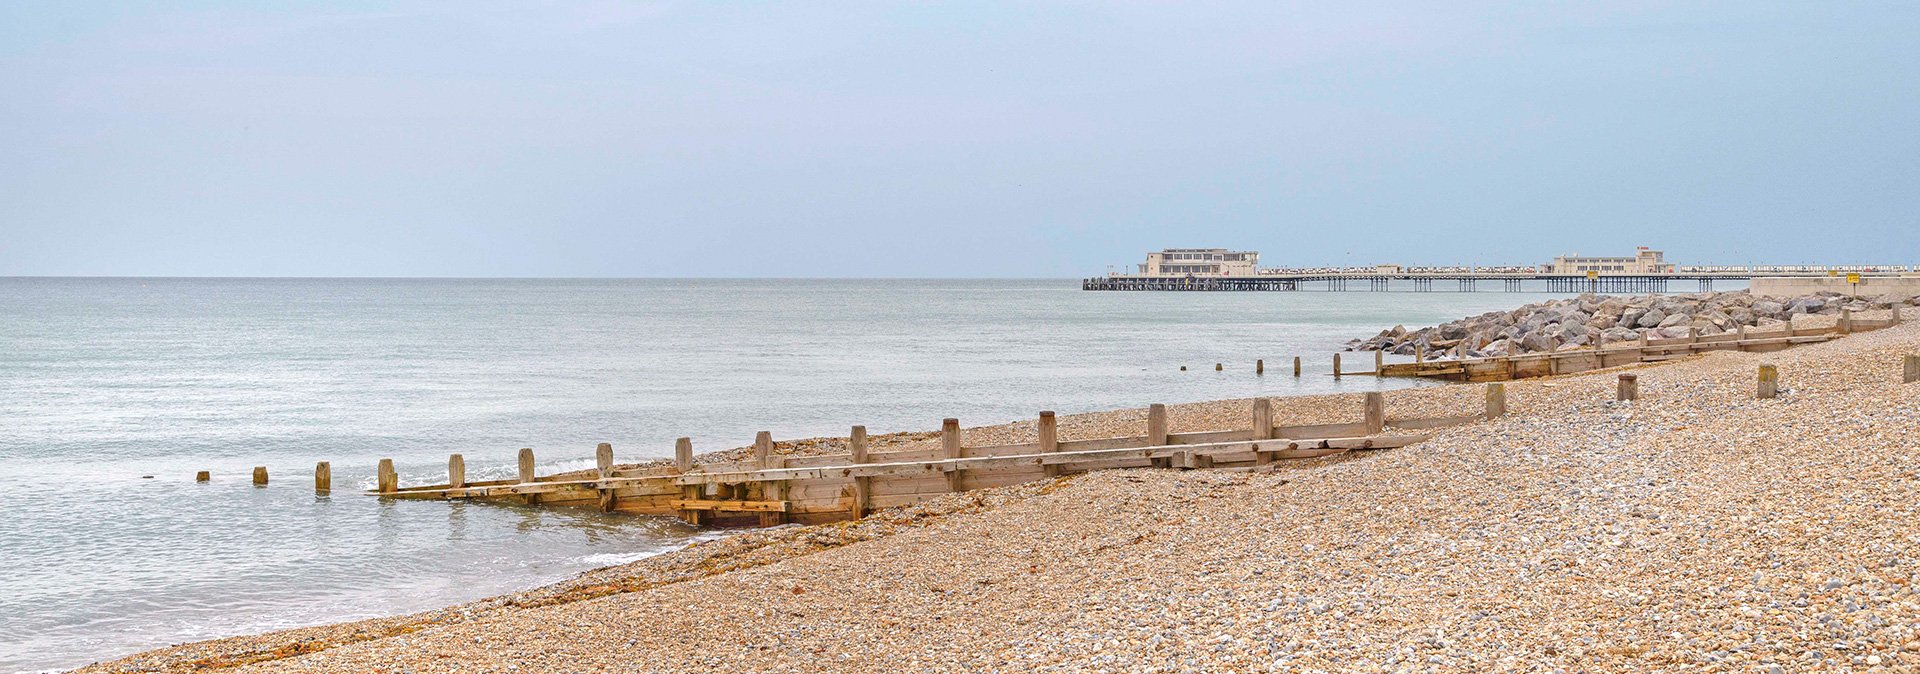 Estate Agents in Worthing and Goring-by-Sea